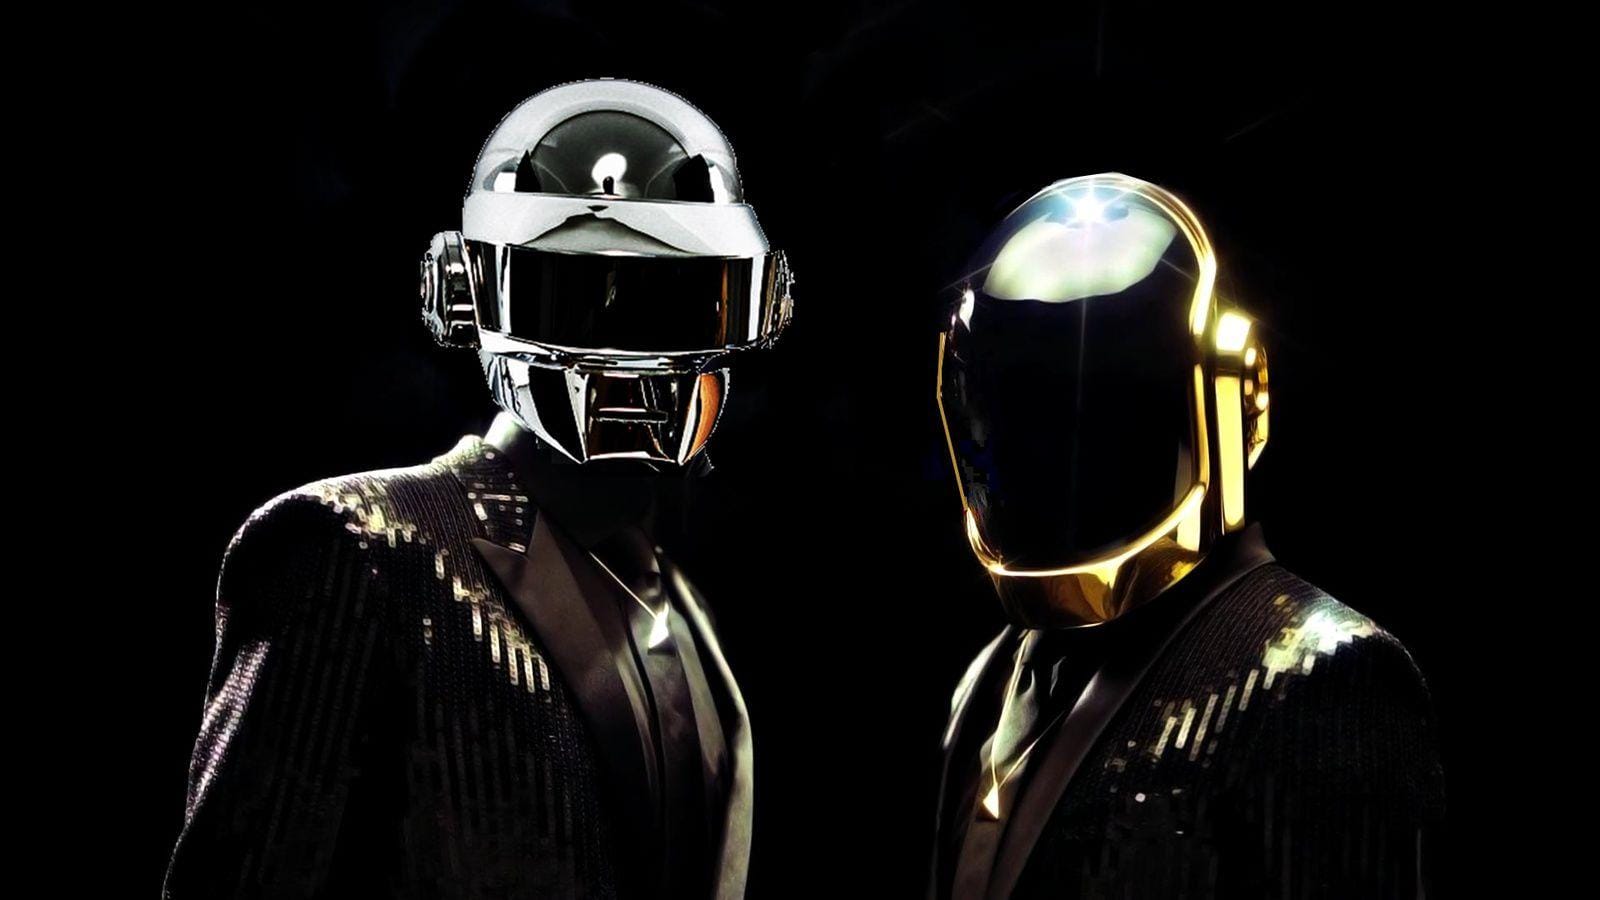 Daft Punk Faces 2021 / Daft Punk breaks up after nearly three decades